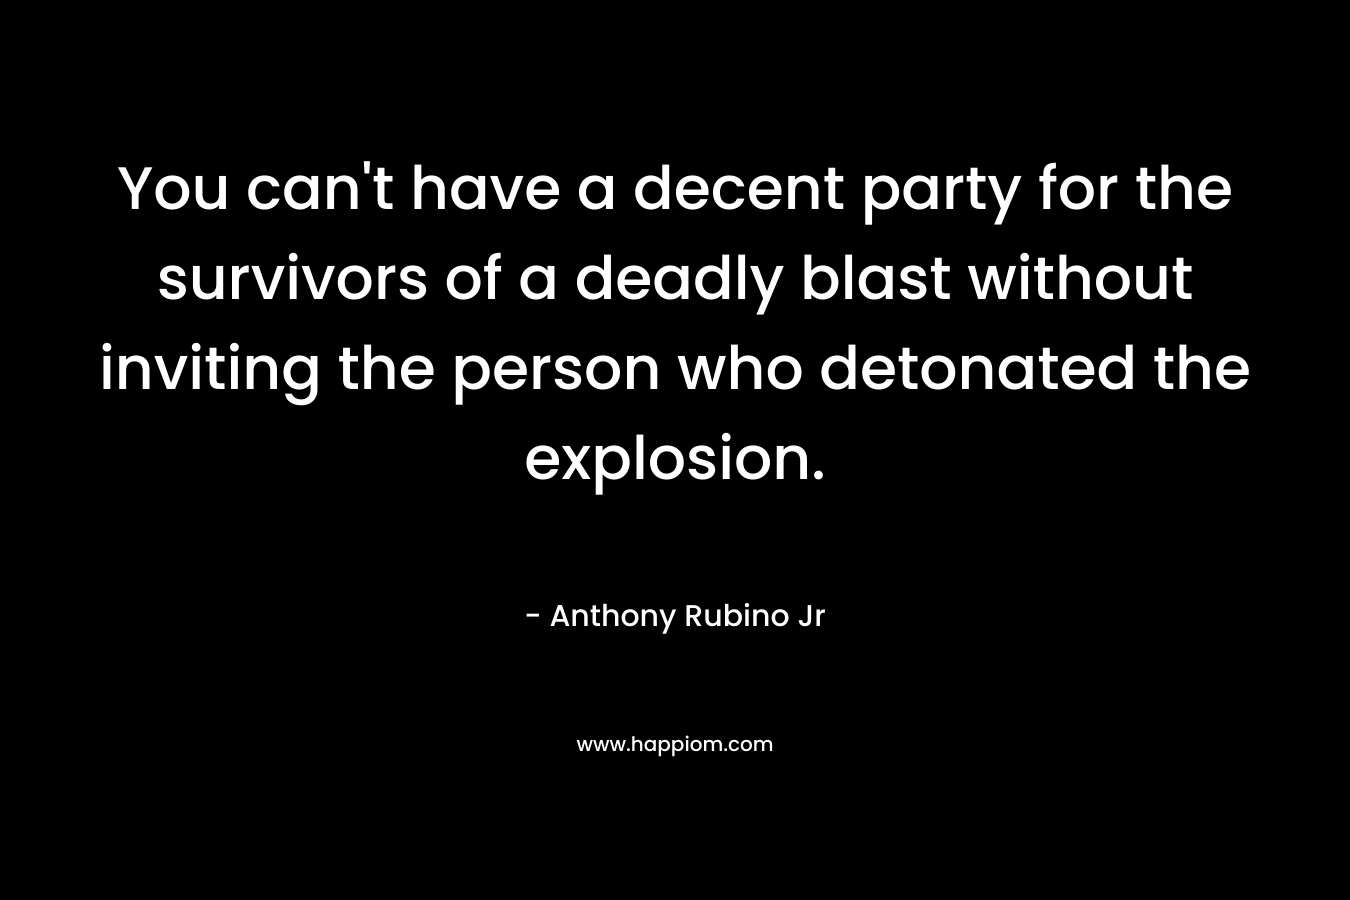 You can't have a decent party for the survivors of a deadly blast without inviting the person who detonated the explosion.